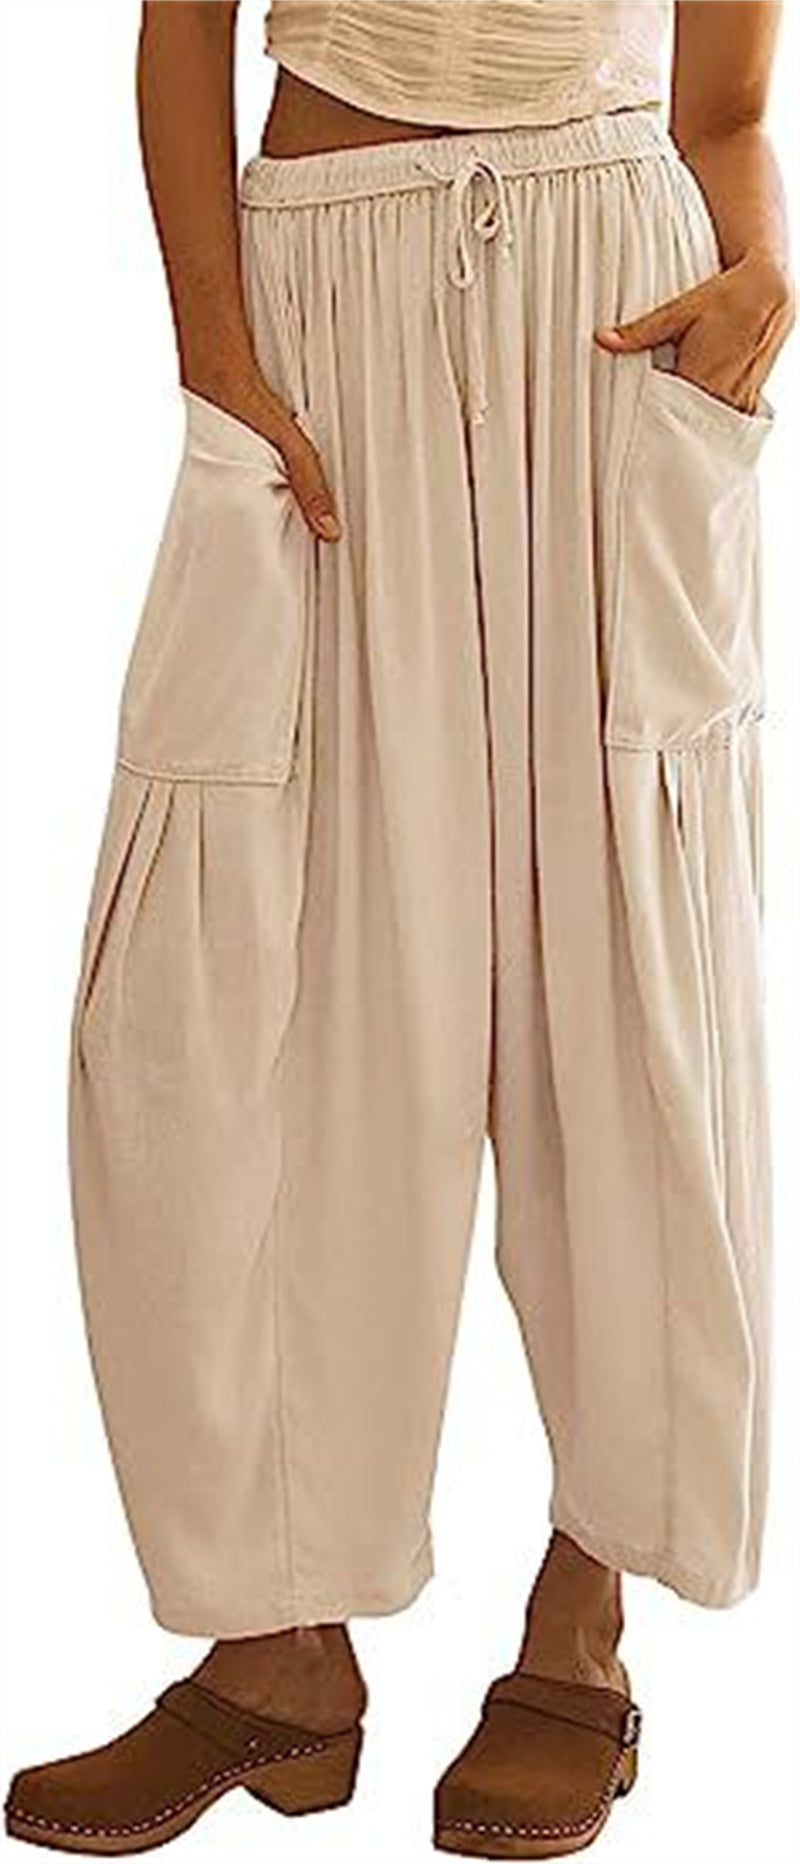 Fashion Wide Leg Pants Summer Loose Elastic High Waist Pleated Trousers Solid Color Womens Clothing